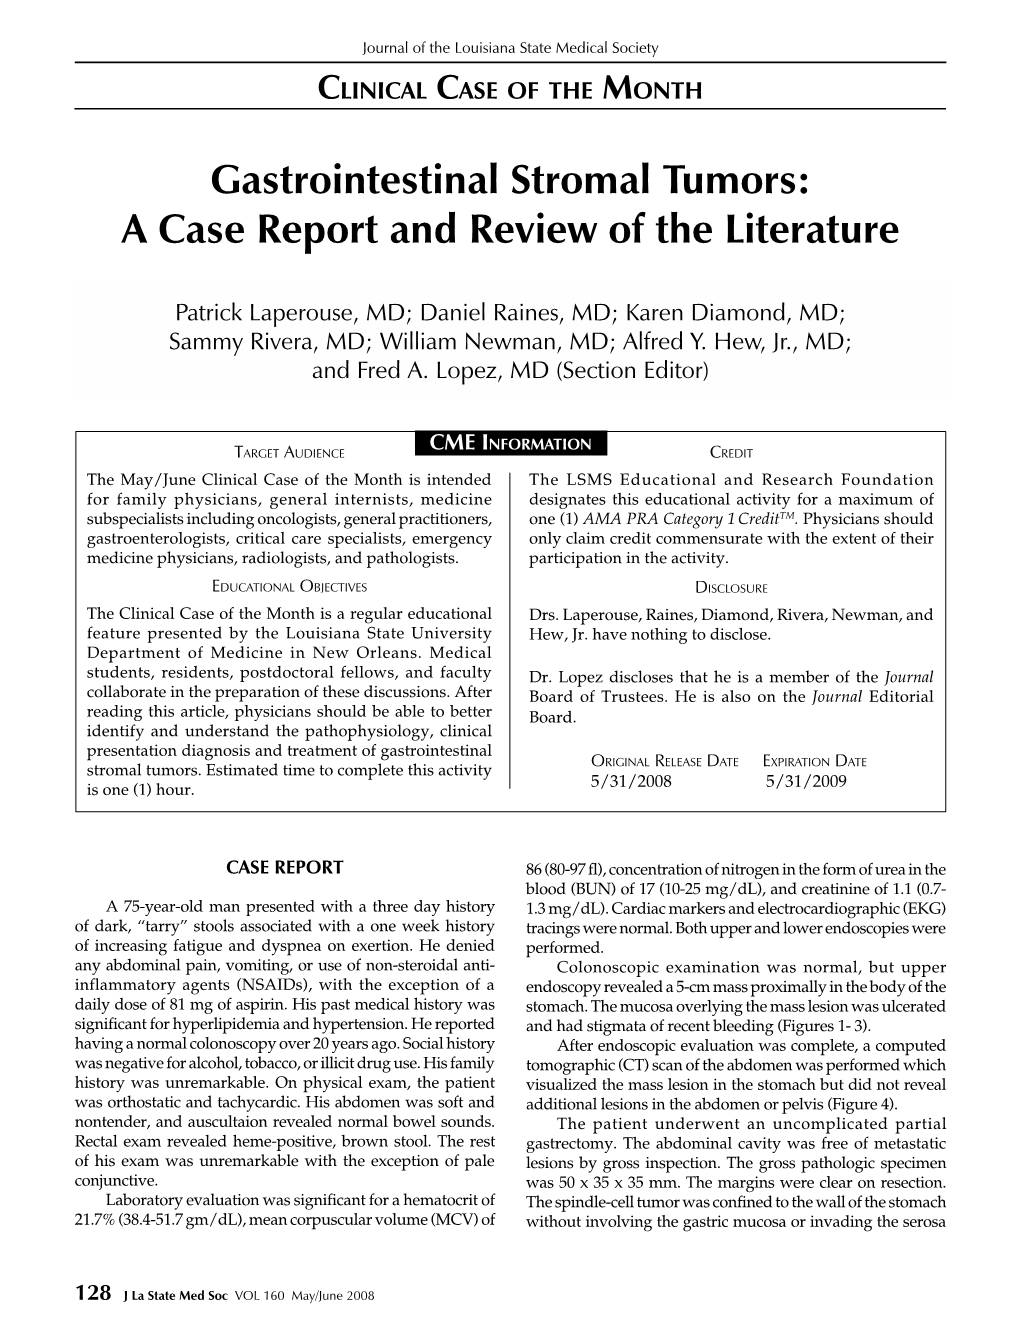 Gastrointestinal Stromal Tumors: a Case Report and Review of the Literature